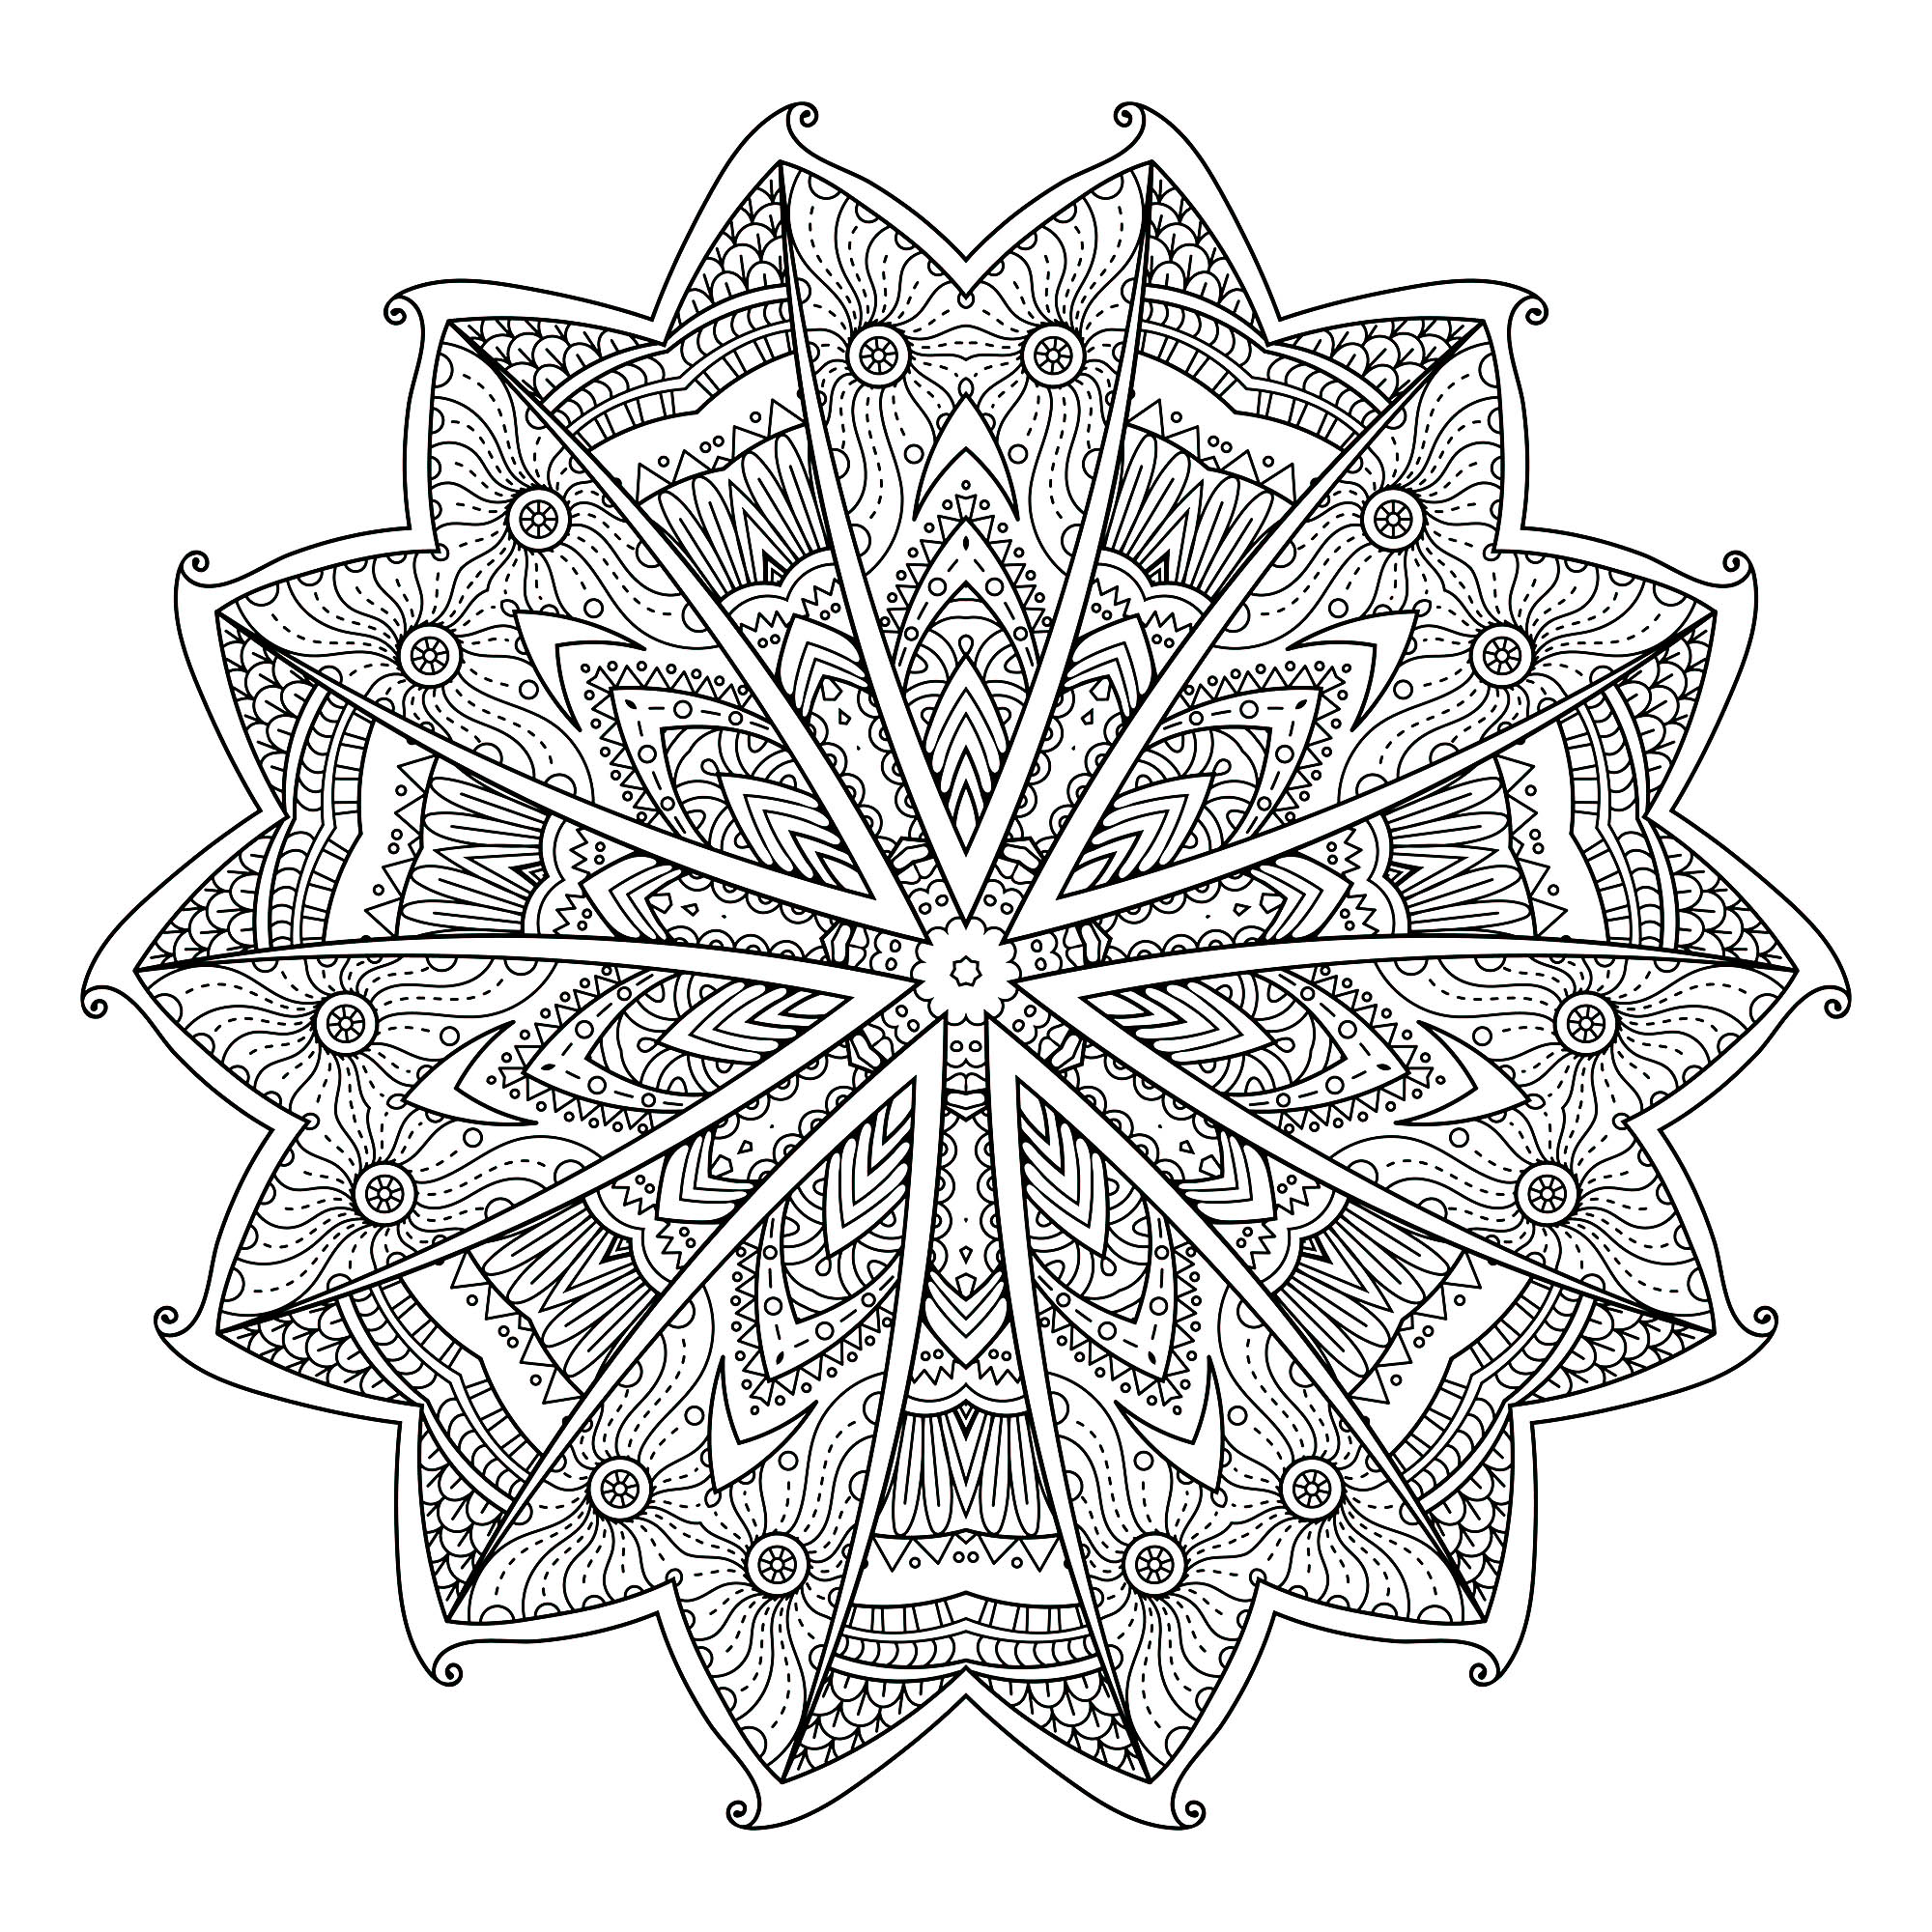 Download Abstract decorative background - Mandalas Adult Coloring Pages